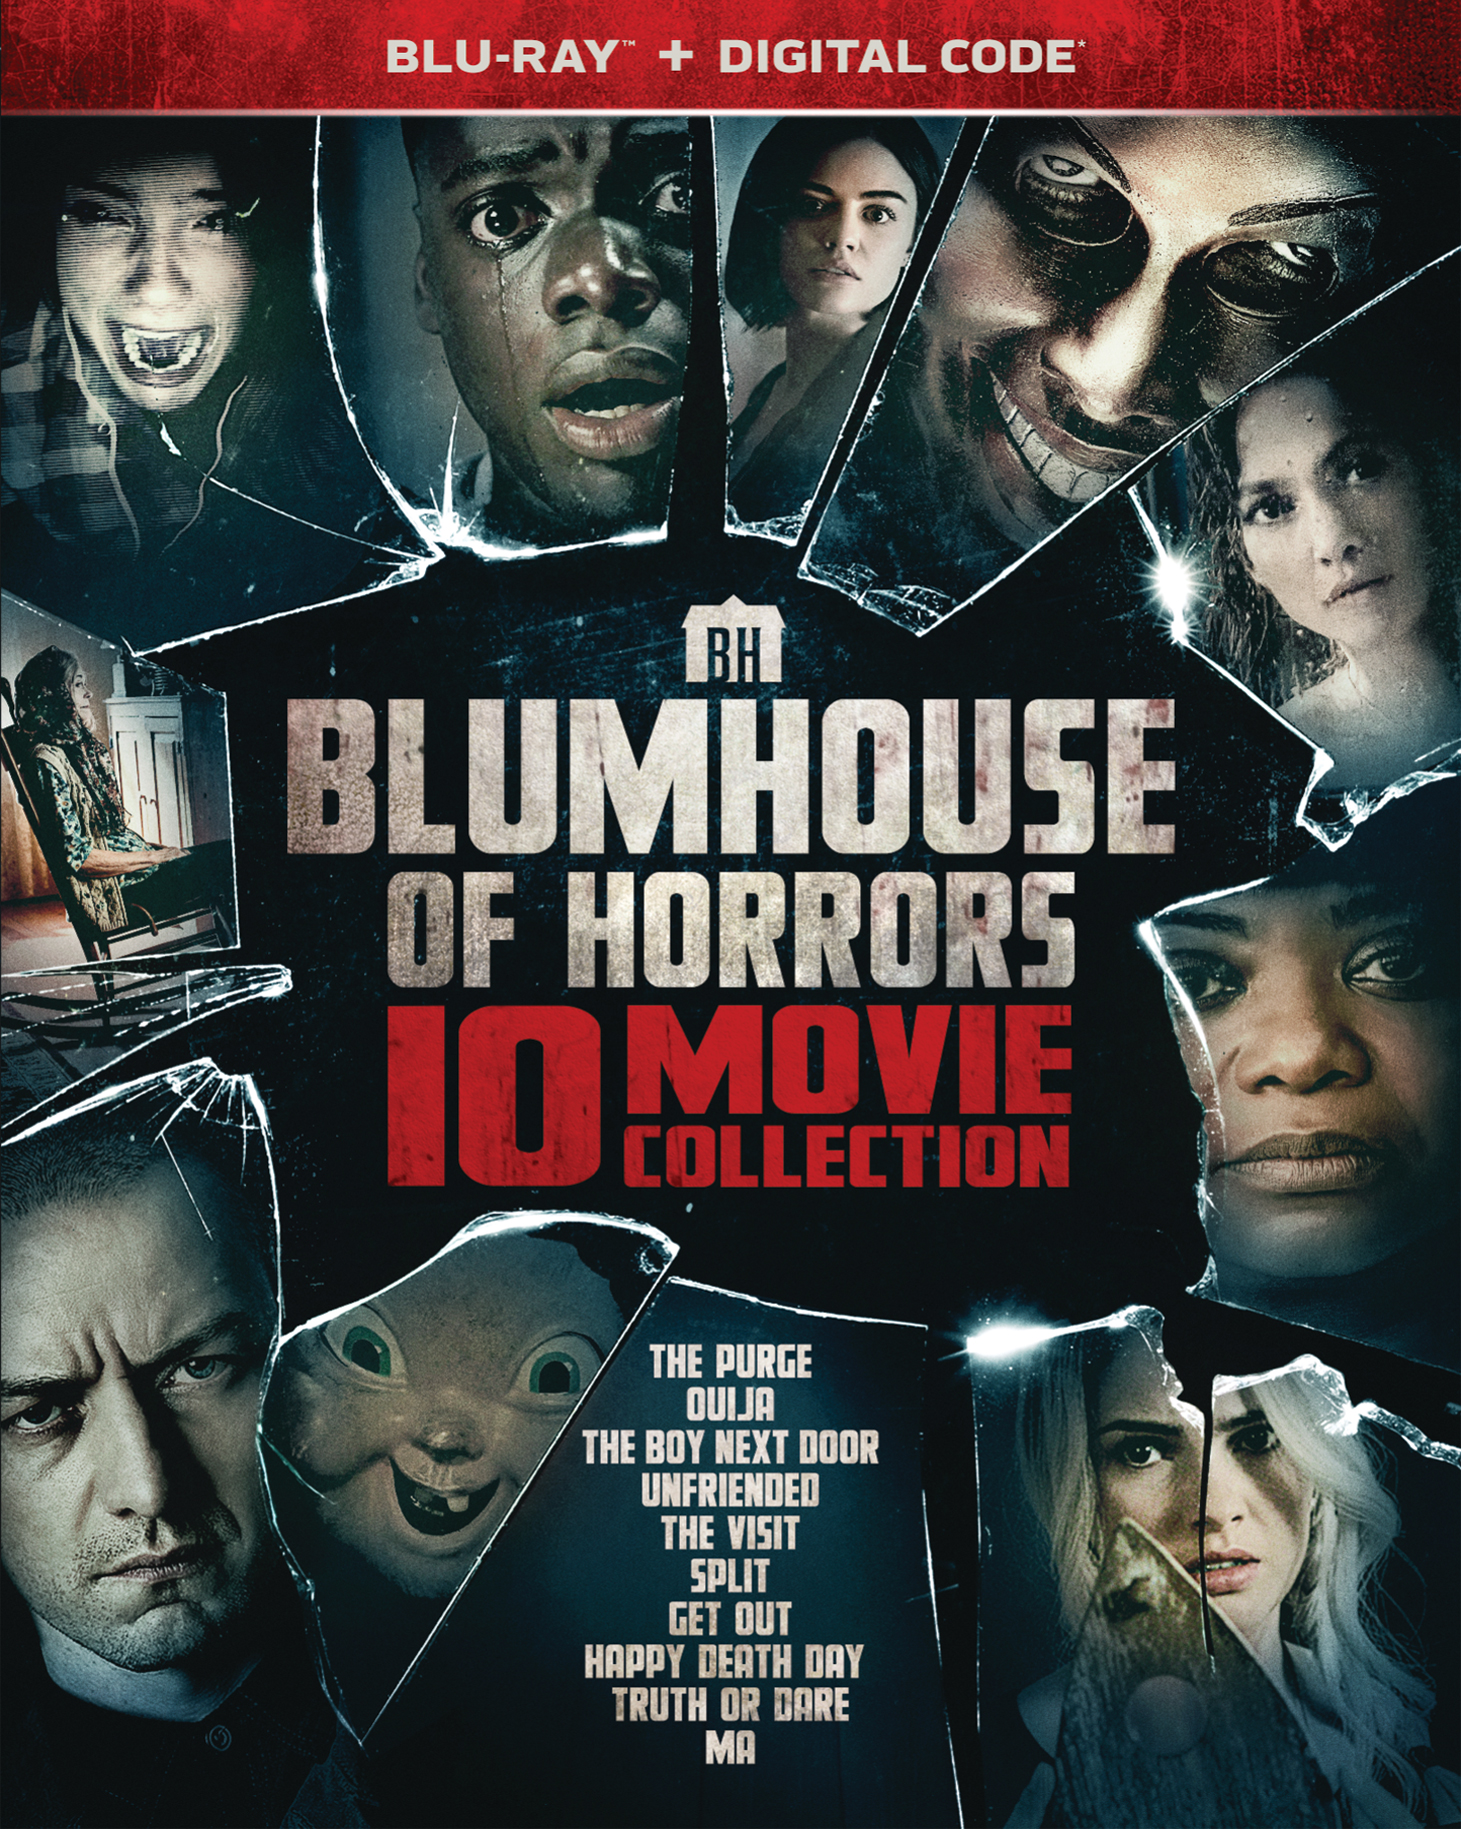 Levere Spekulerer linse Blumhouse of Horrors: 10-Movie Collection [Blu-ray] - Best Buy